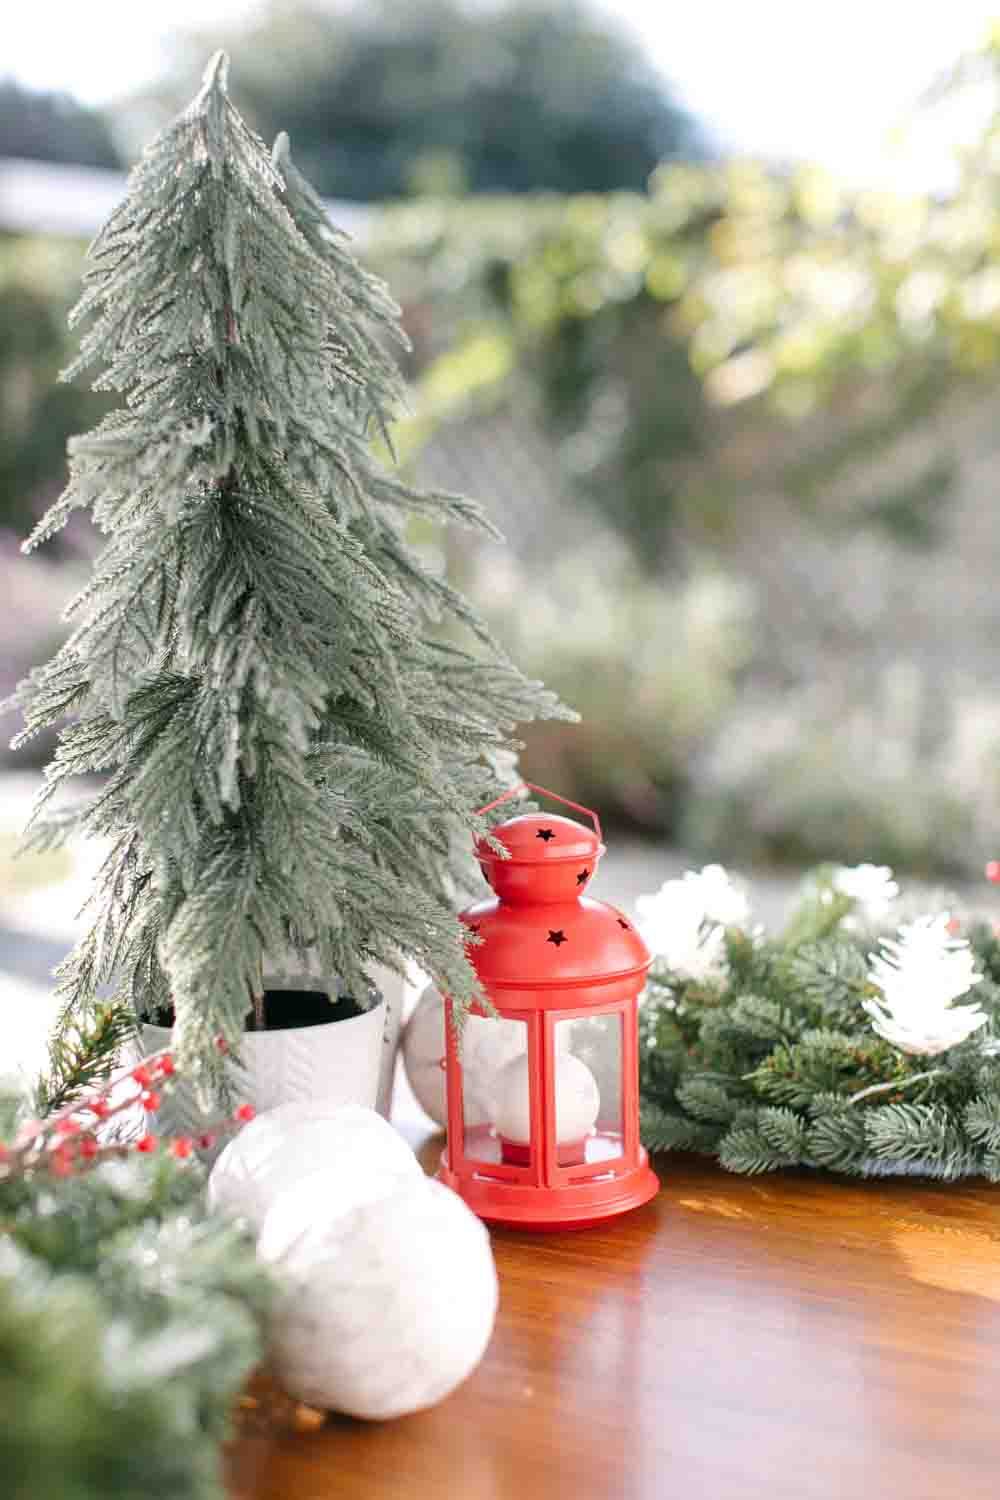 5 Best Ideas to Stay Organized During Holidays Standard Pins 4 web res